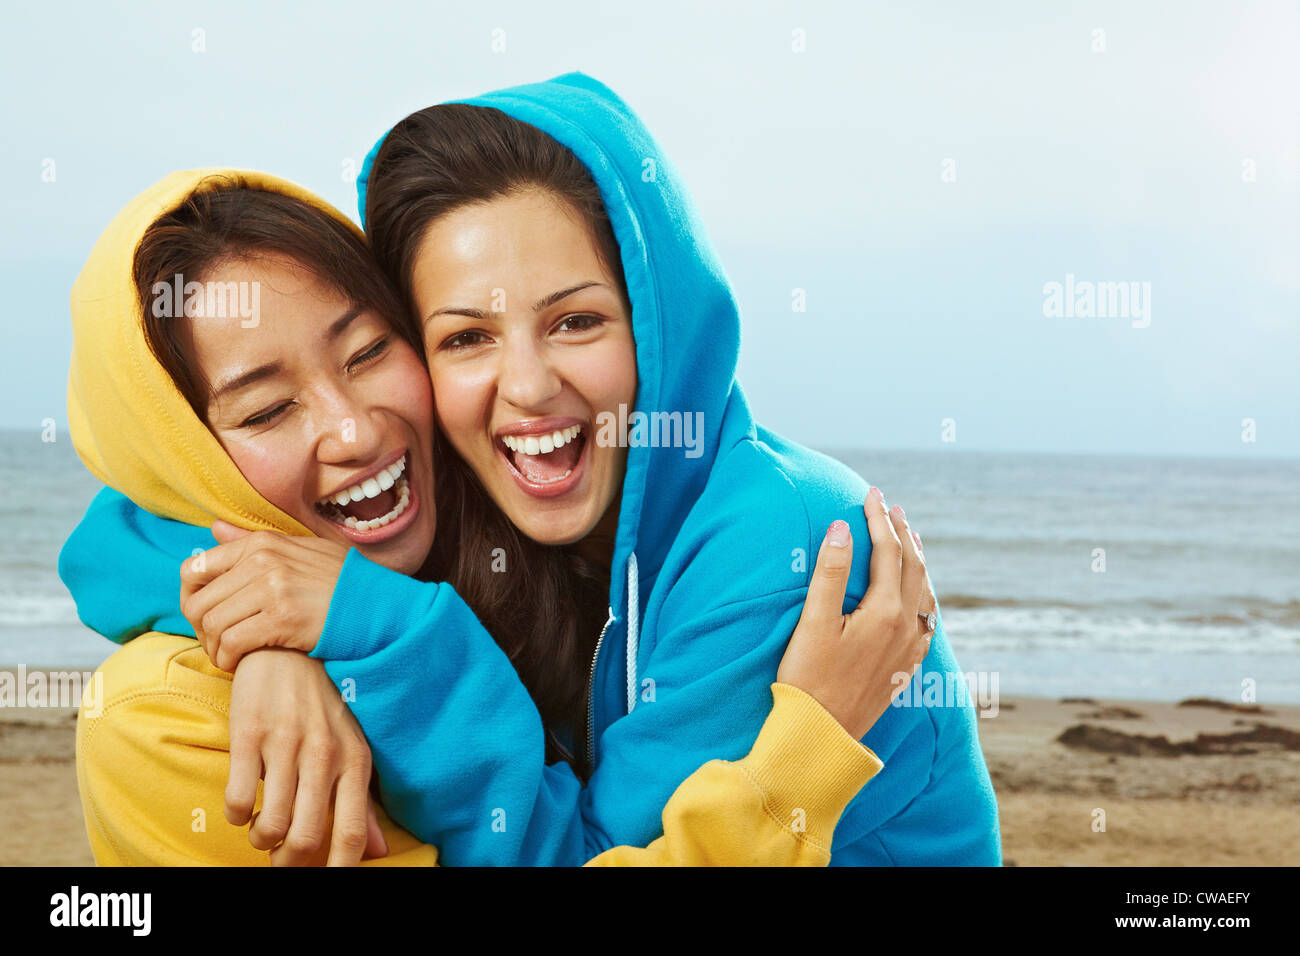 Two young women in hooded tops on beach Stock Photo